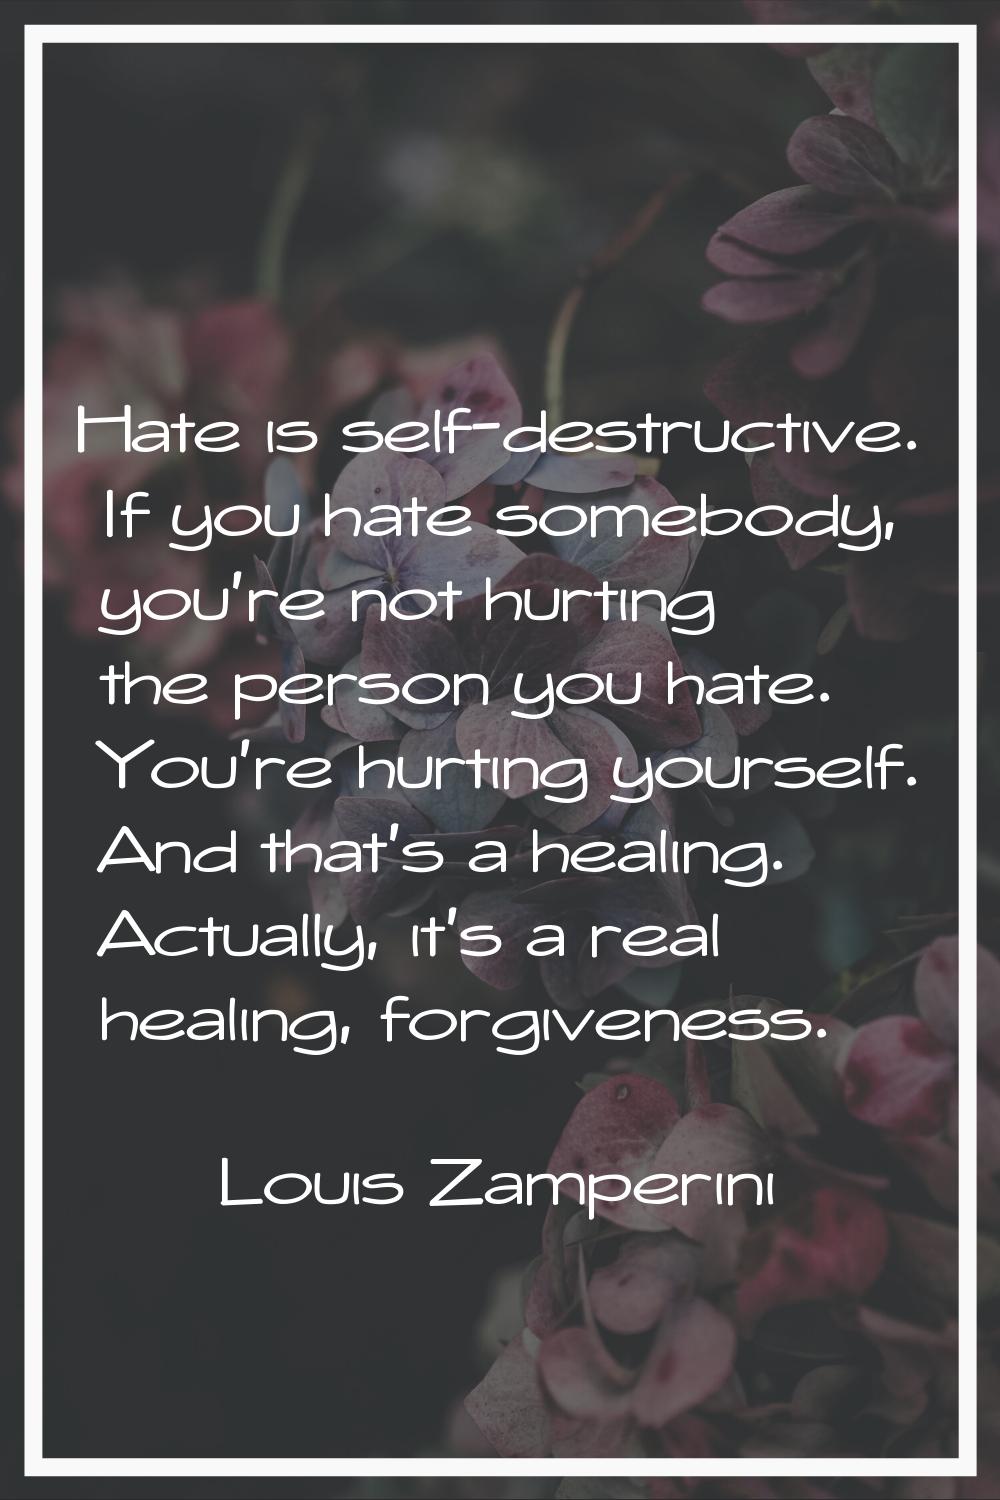 Hate is self-destructive. If you hate somebody, you're not hurting the person you hate. You're hurt